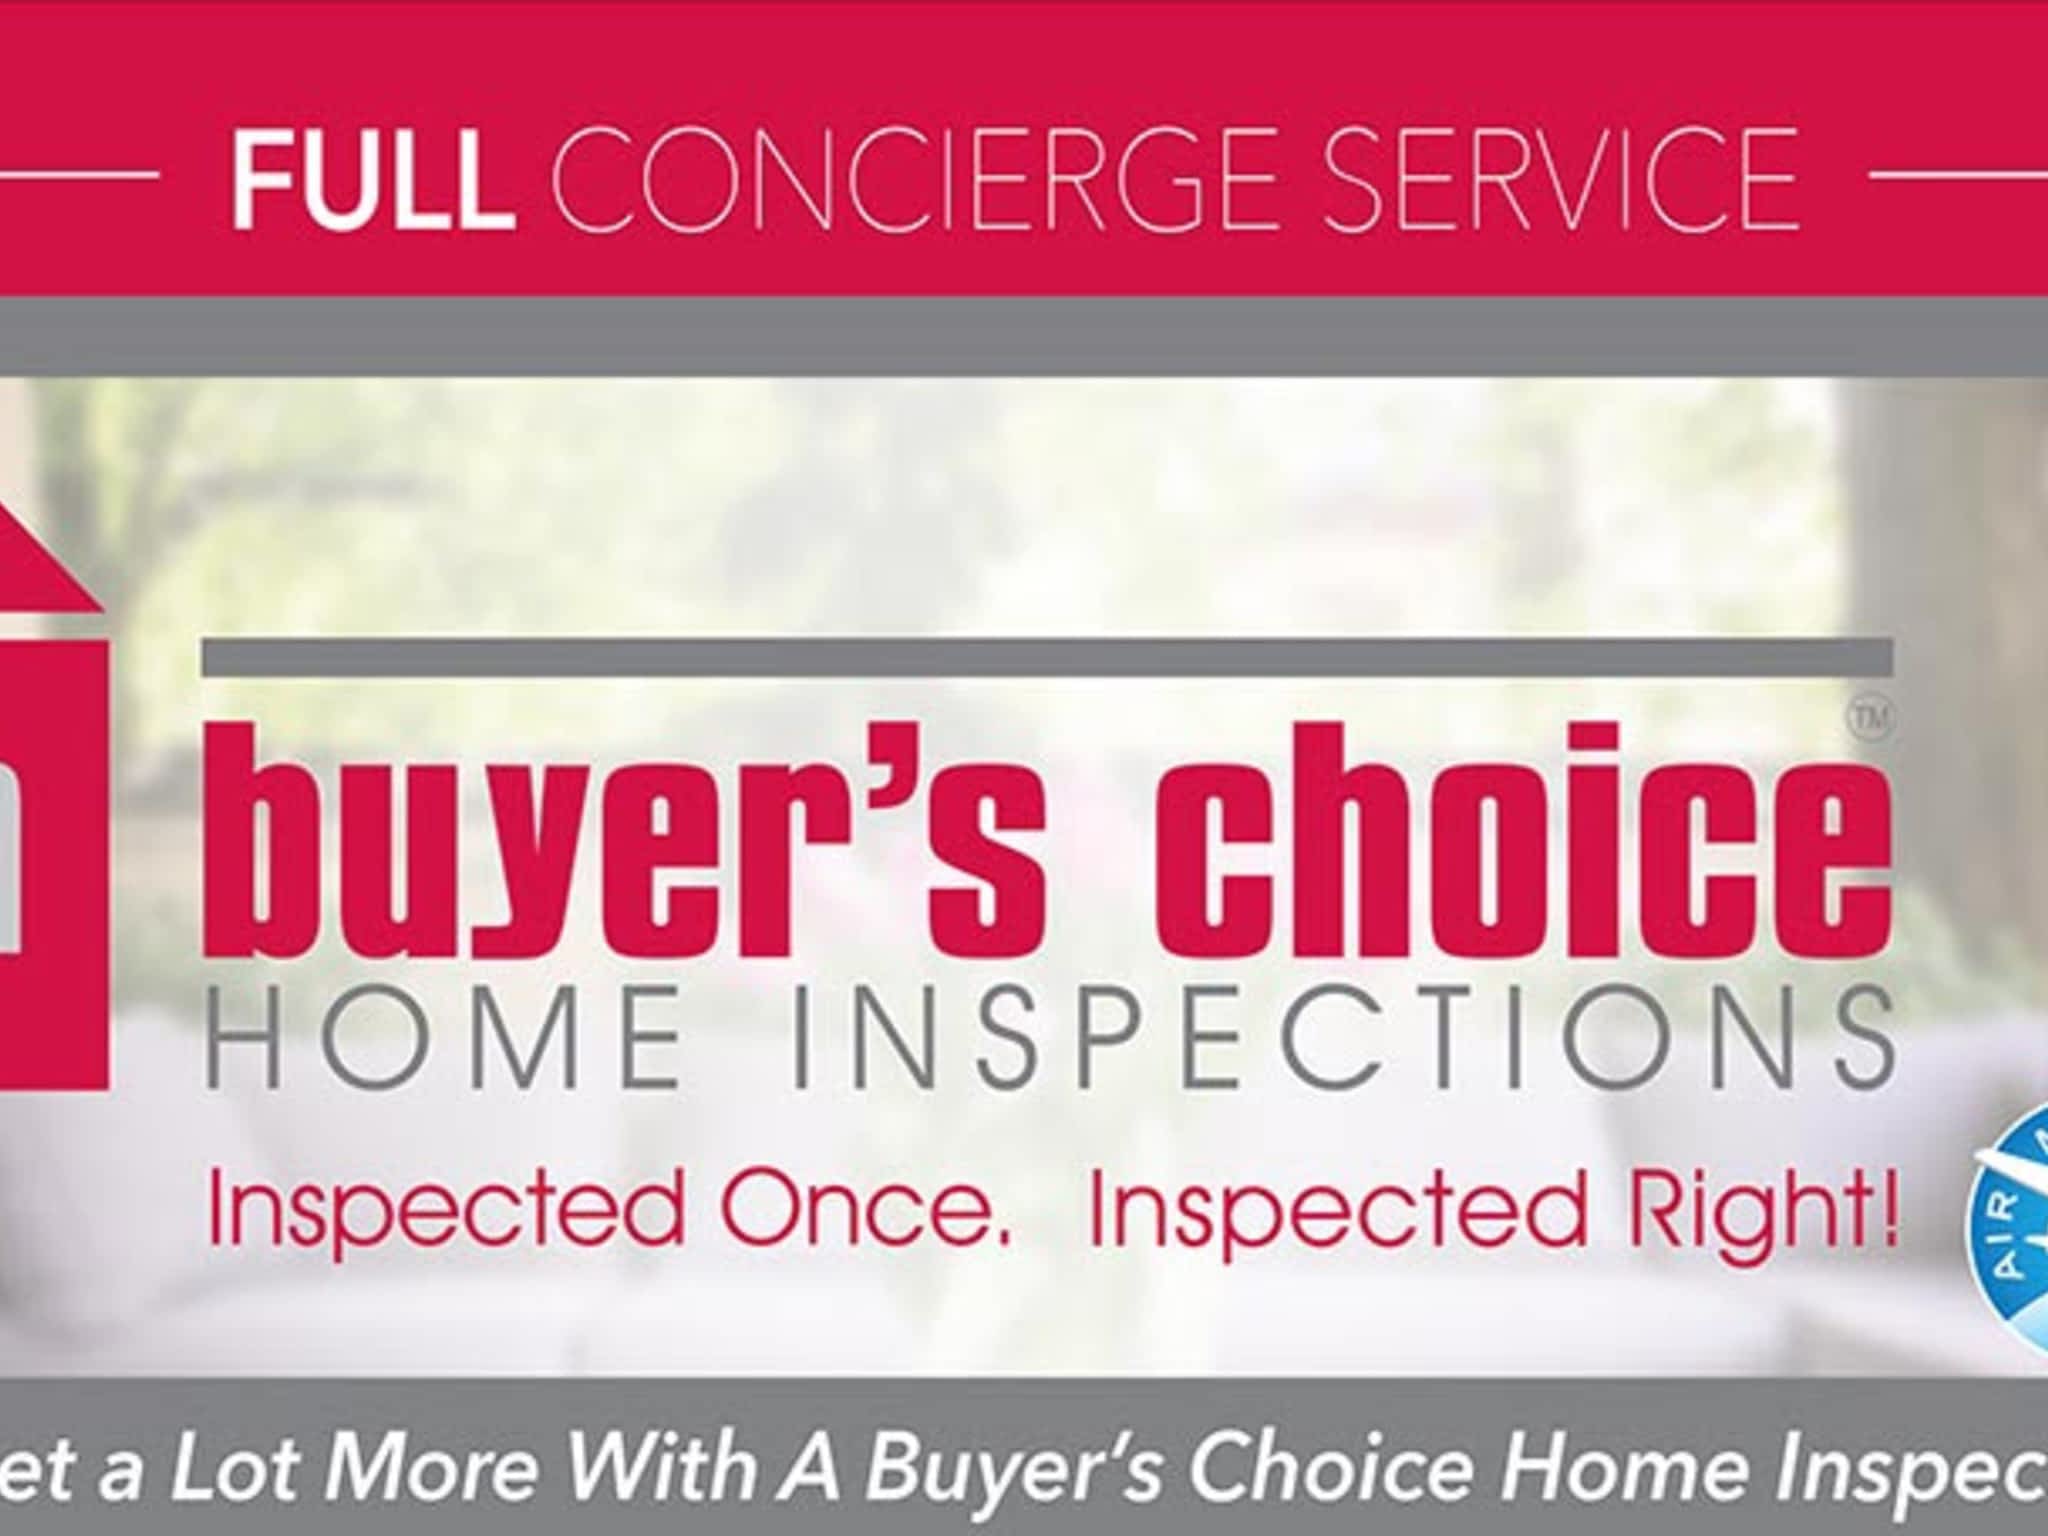 photo Barry Malesh - A Buyer's Choice Home Inspections